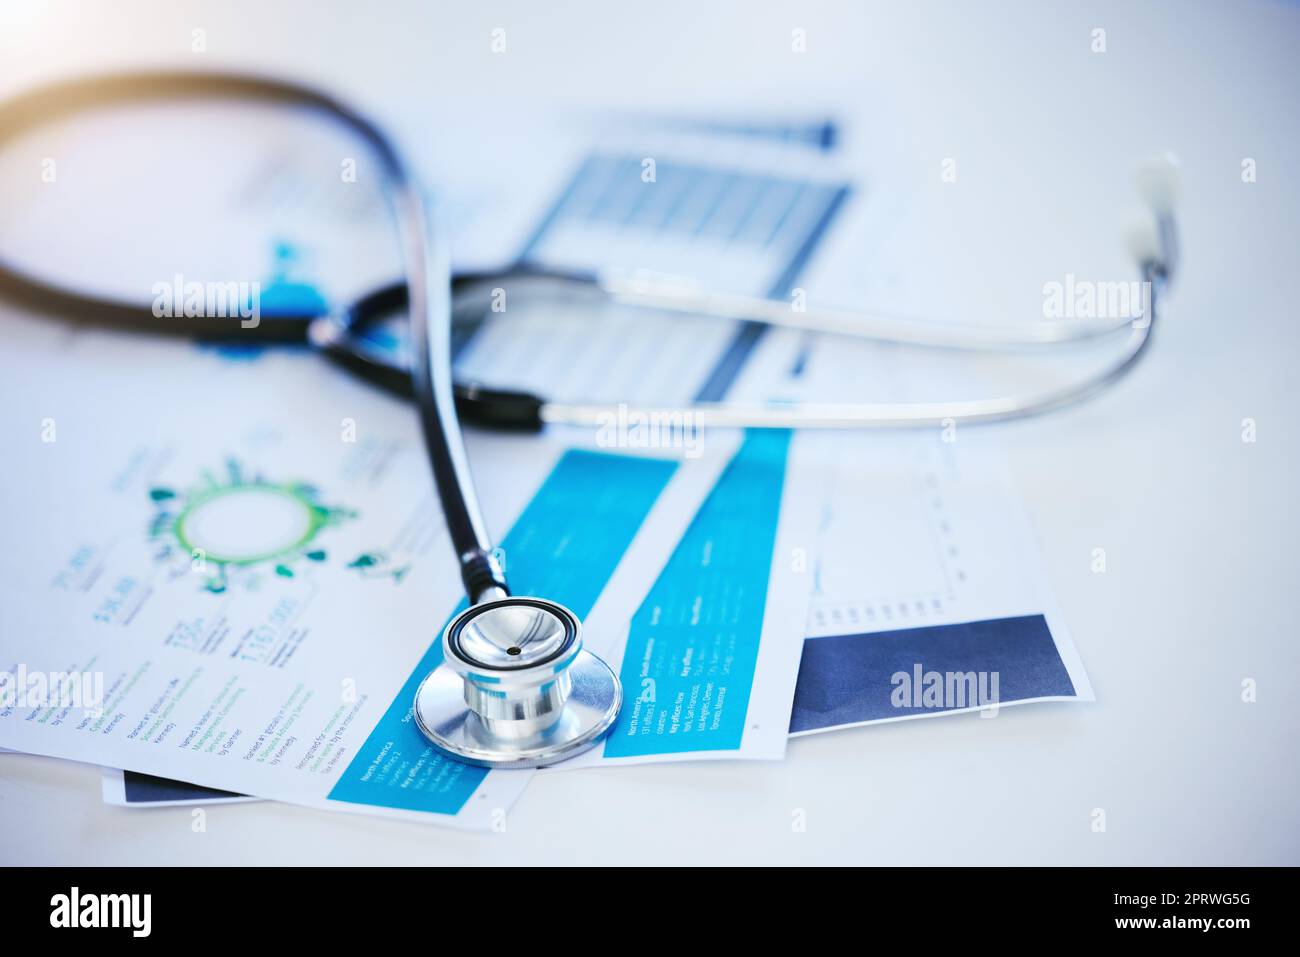 stethoscope for medical doctor diagnosis on blue health science laboratory  background Stock Photo